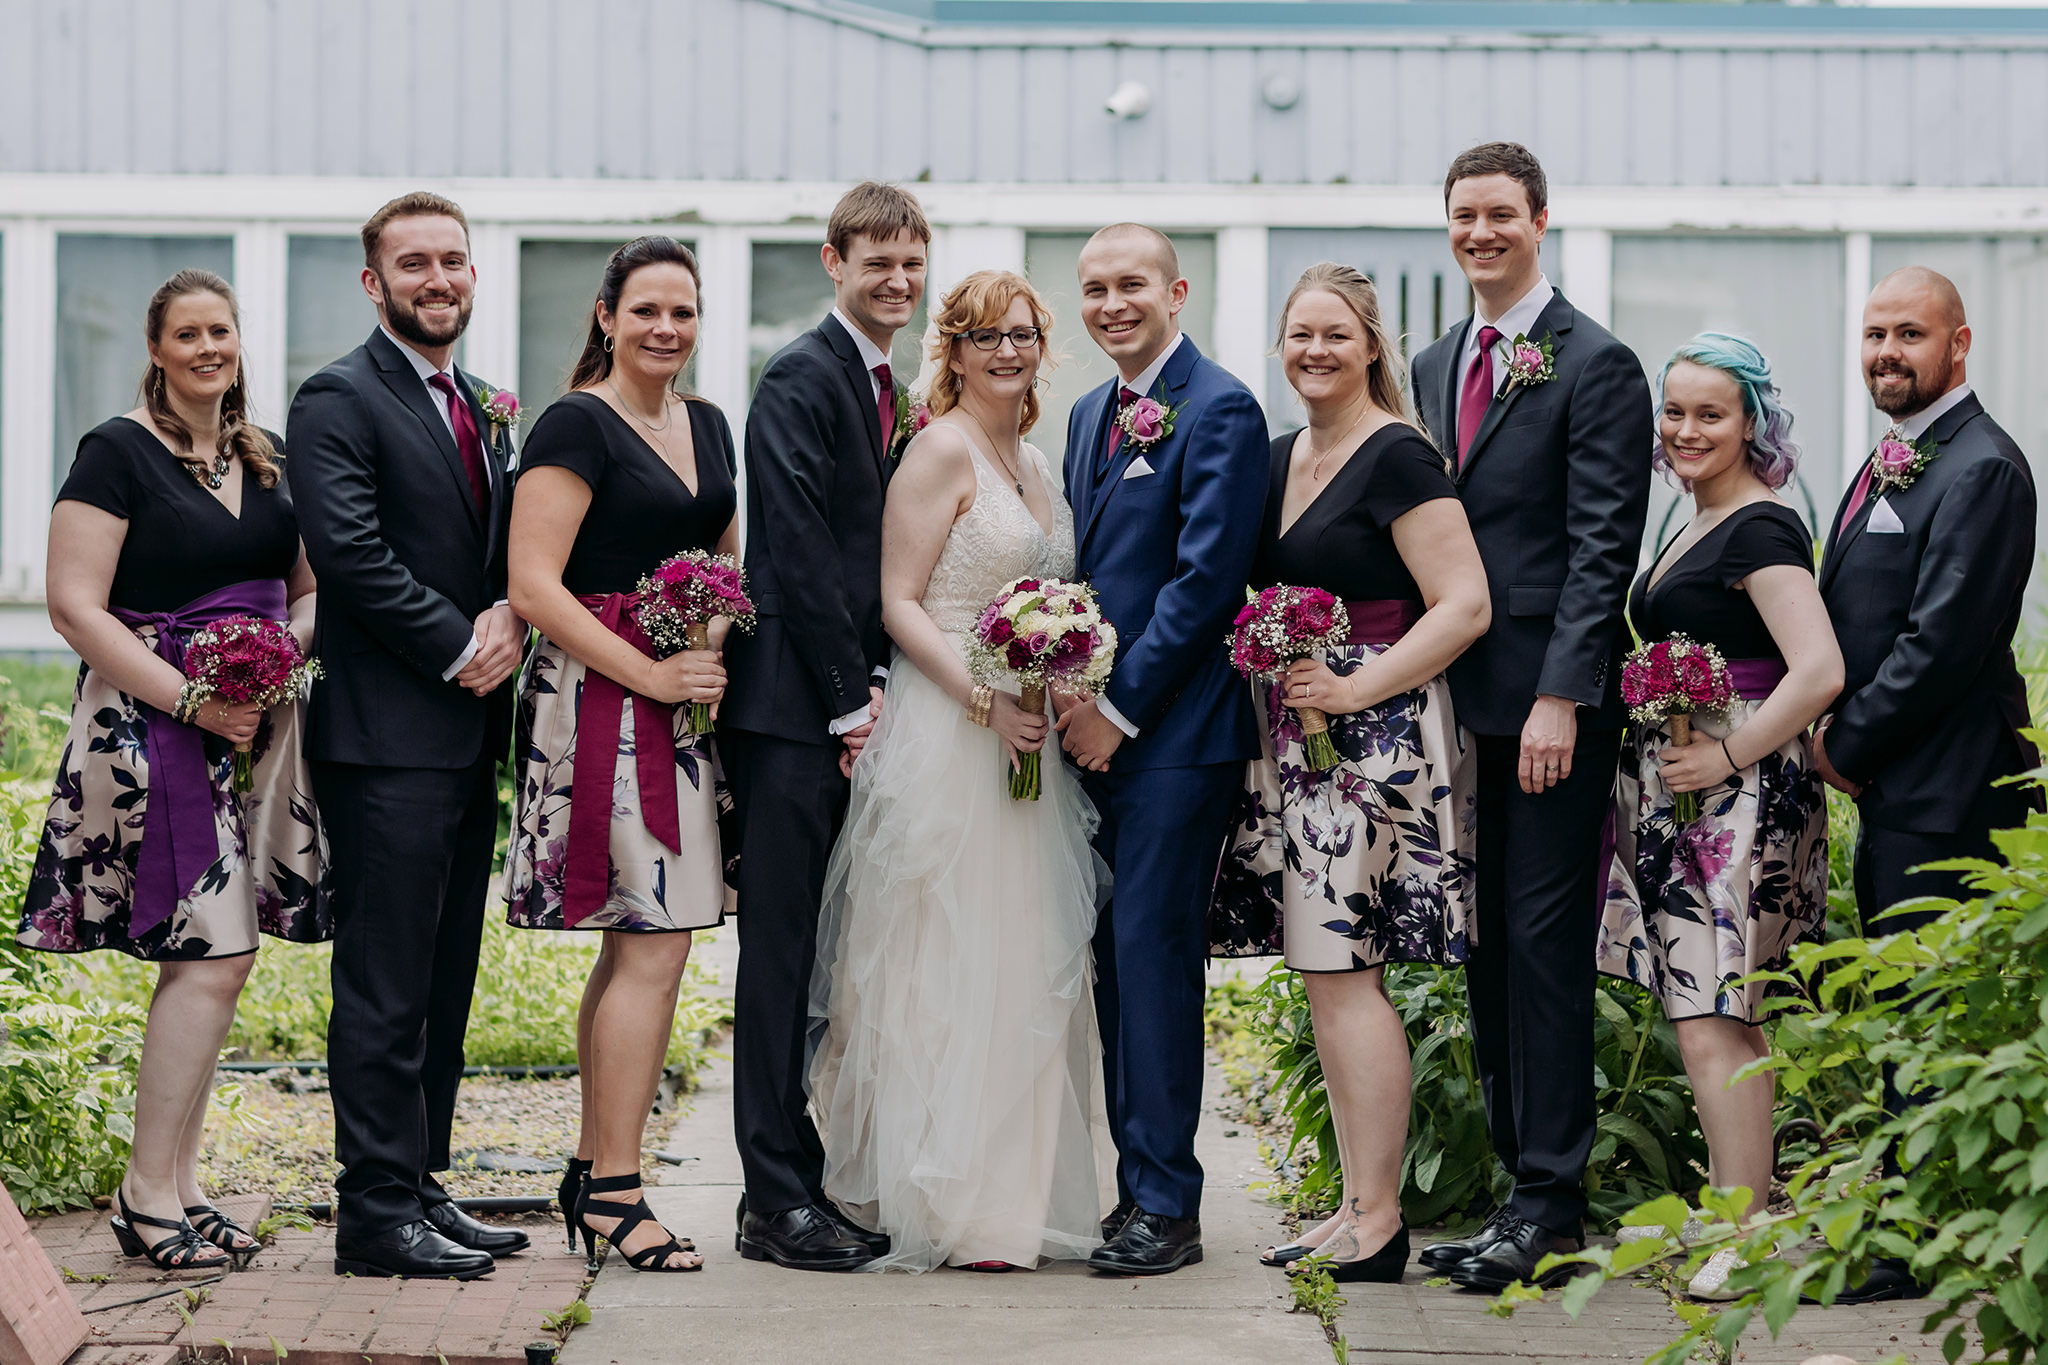 Calgary intimate wedding party portraits in the city with bridesmaids & groomsmen